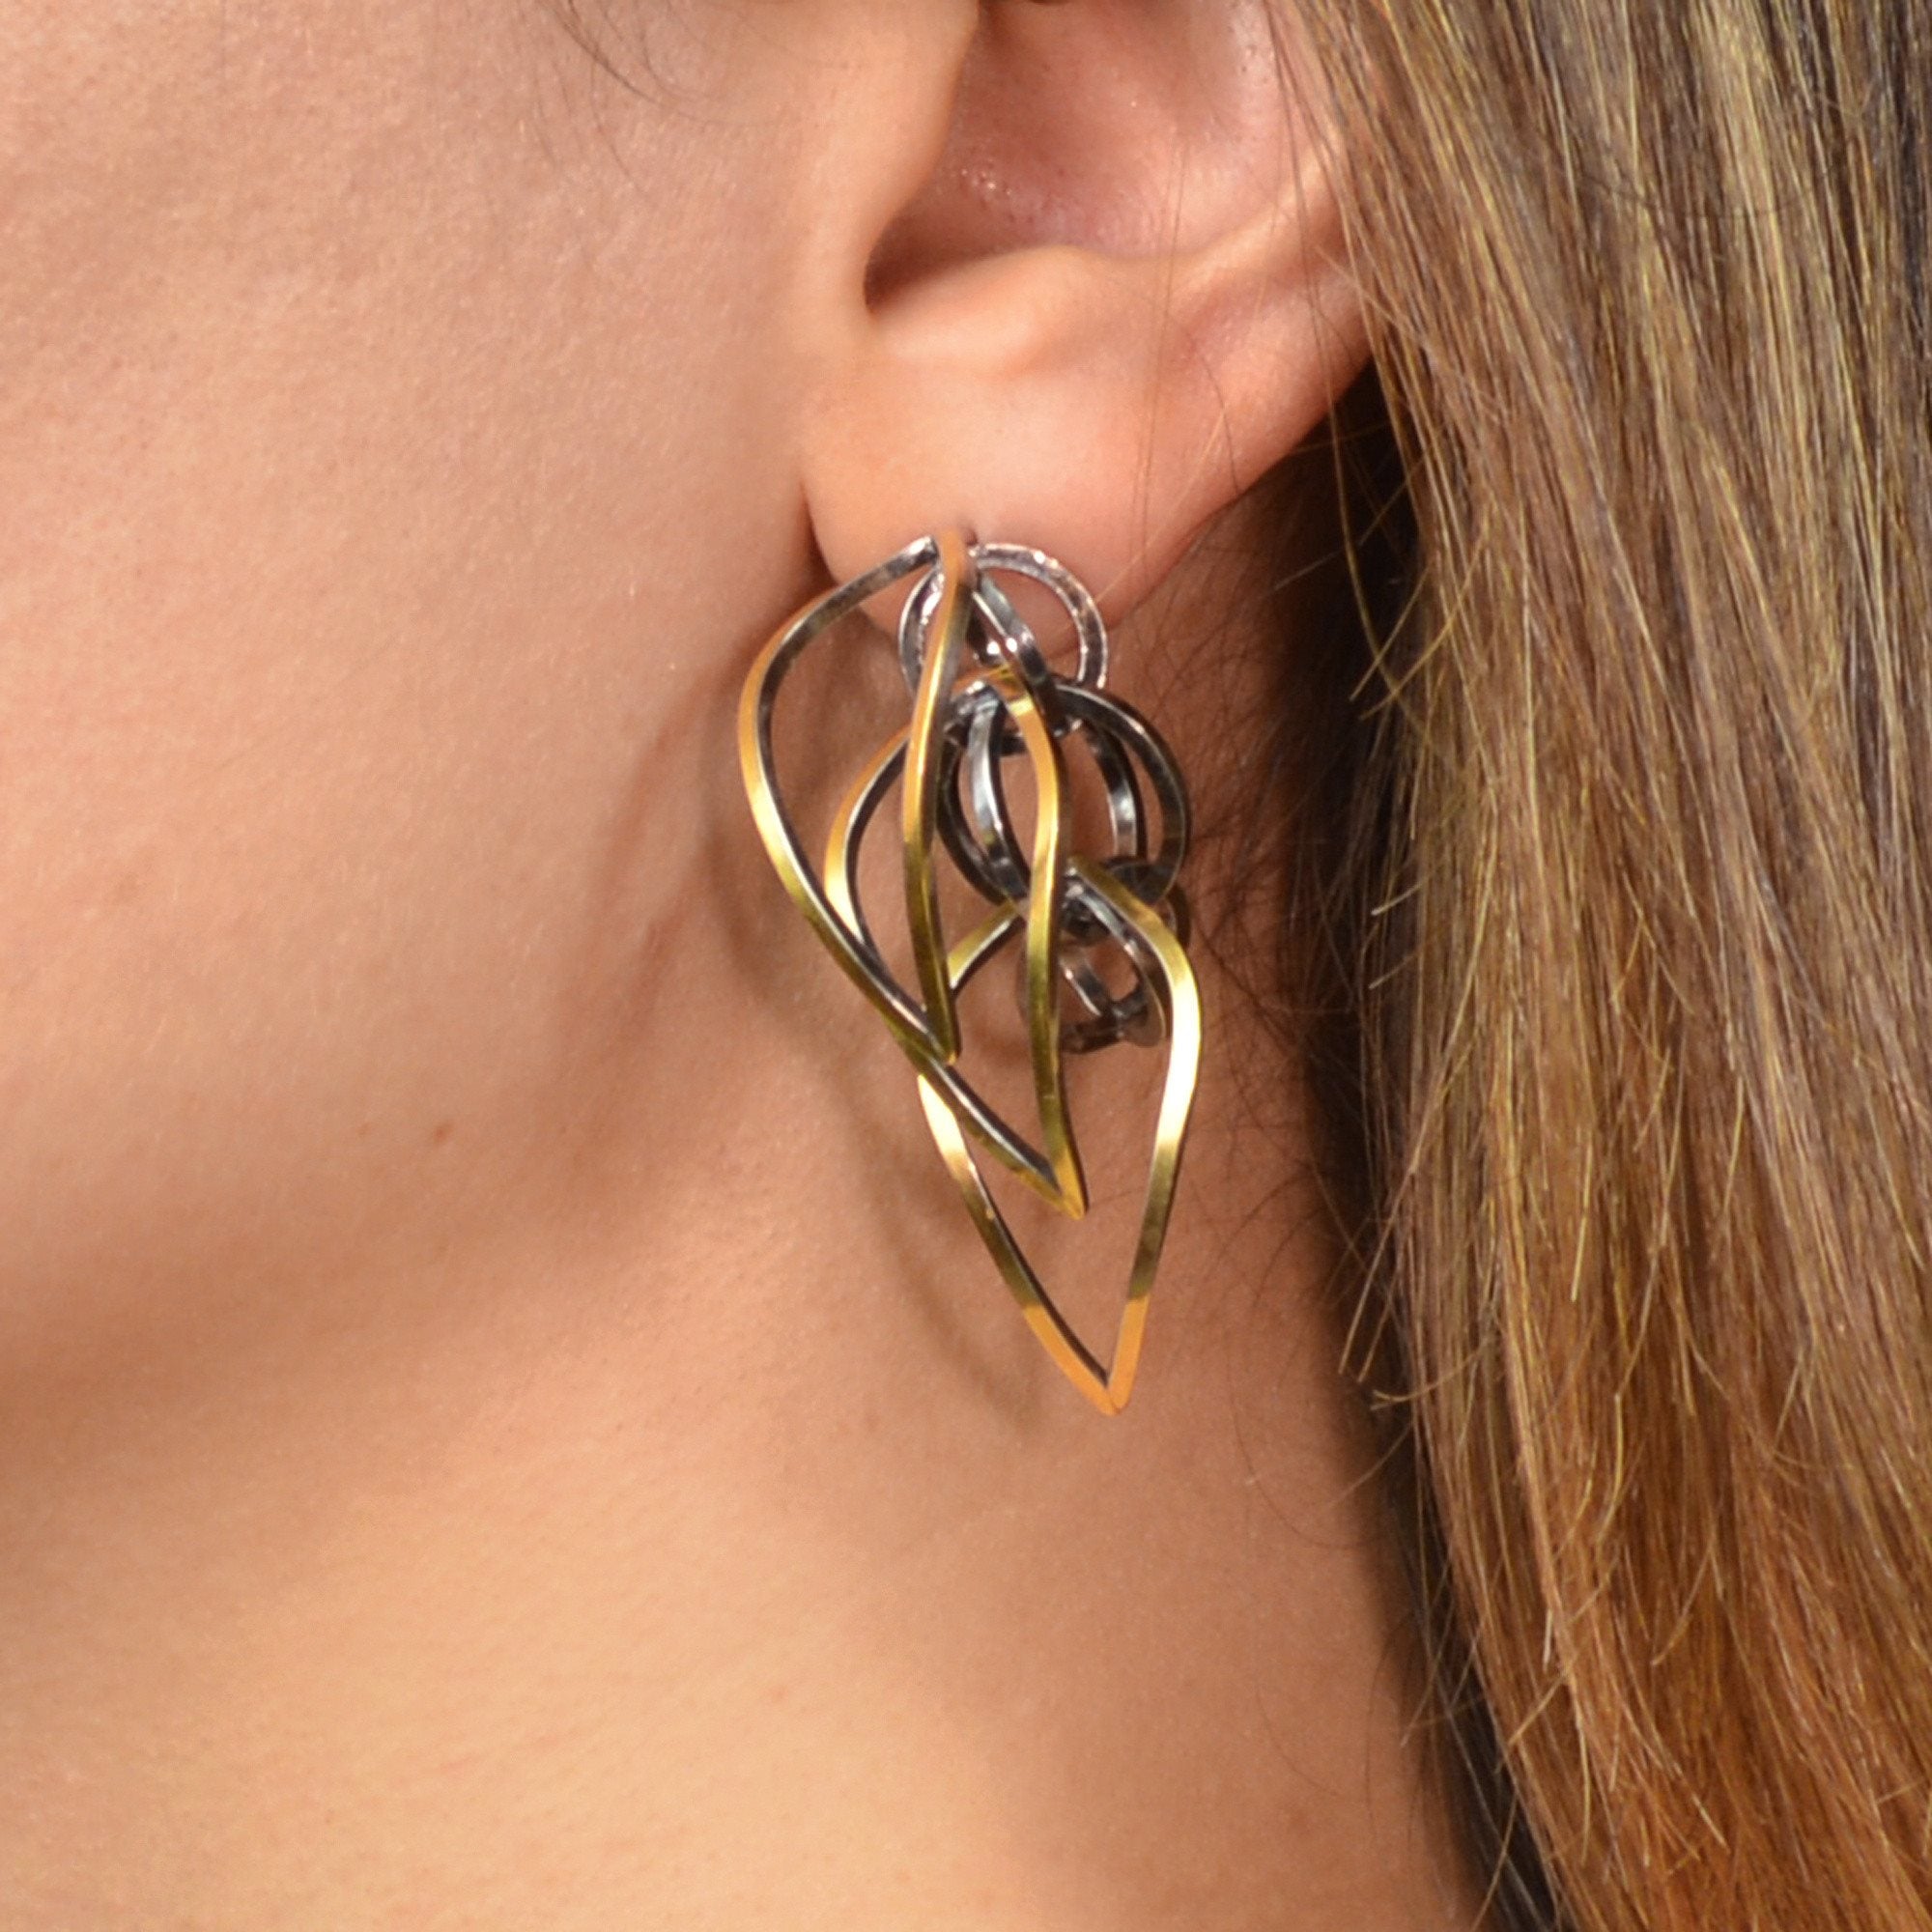 Tighra Earrings in 22k gold and Sterling Silver